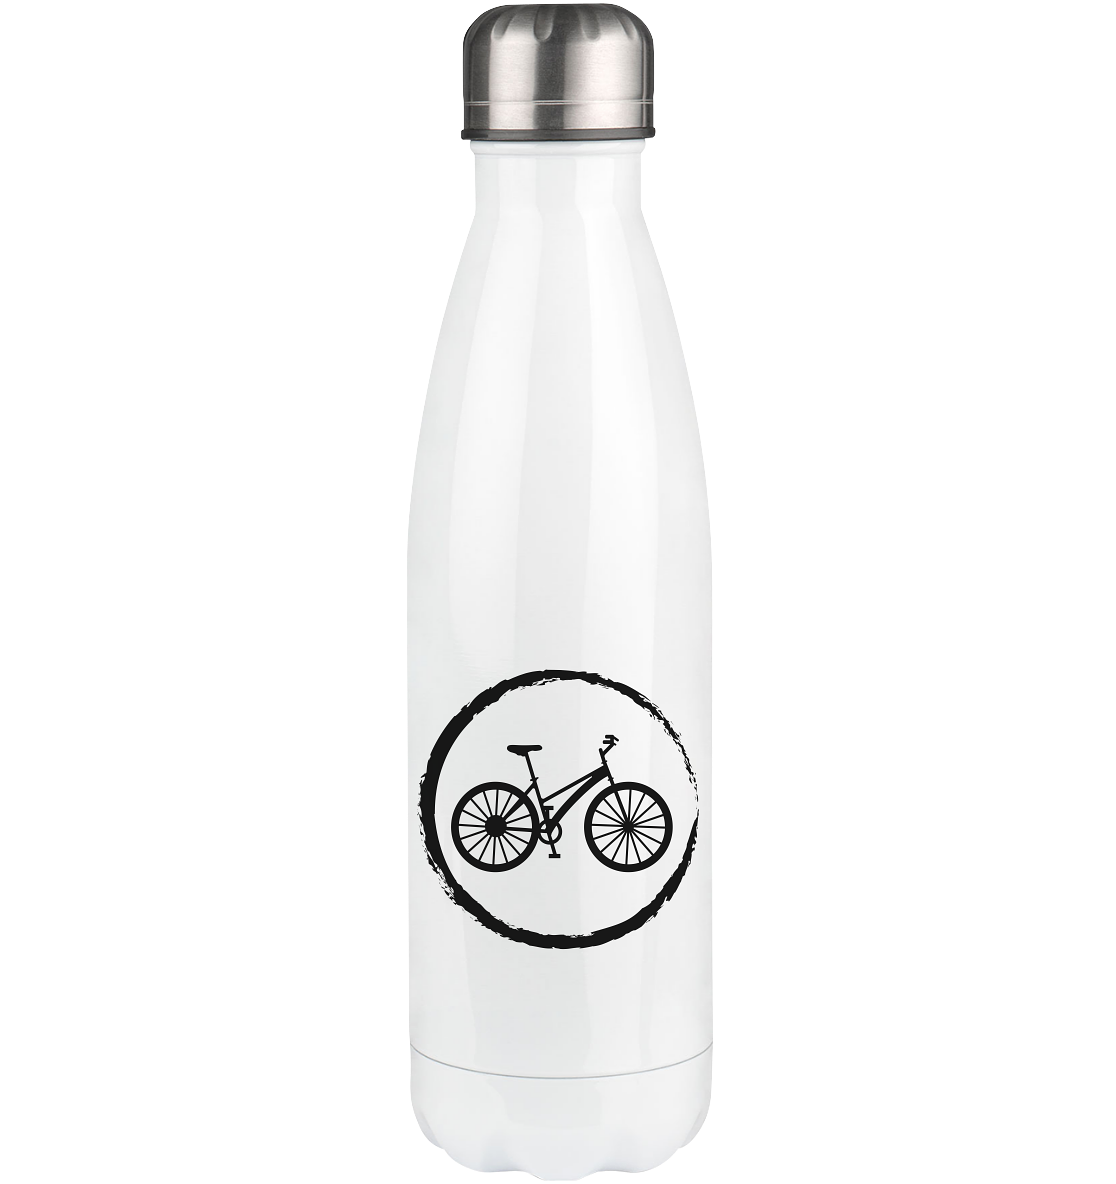 Cricle and Bicycle - Edelstahl Thermosflasche fahrrad 500ml